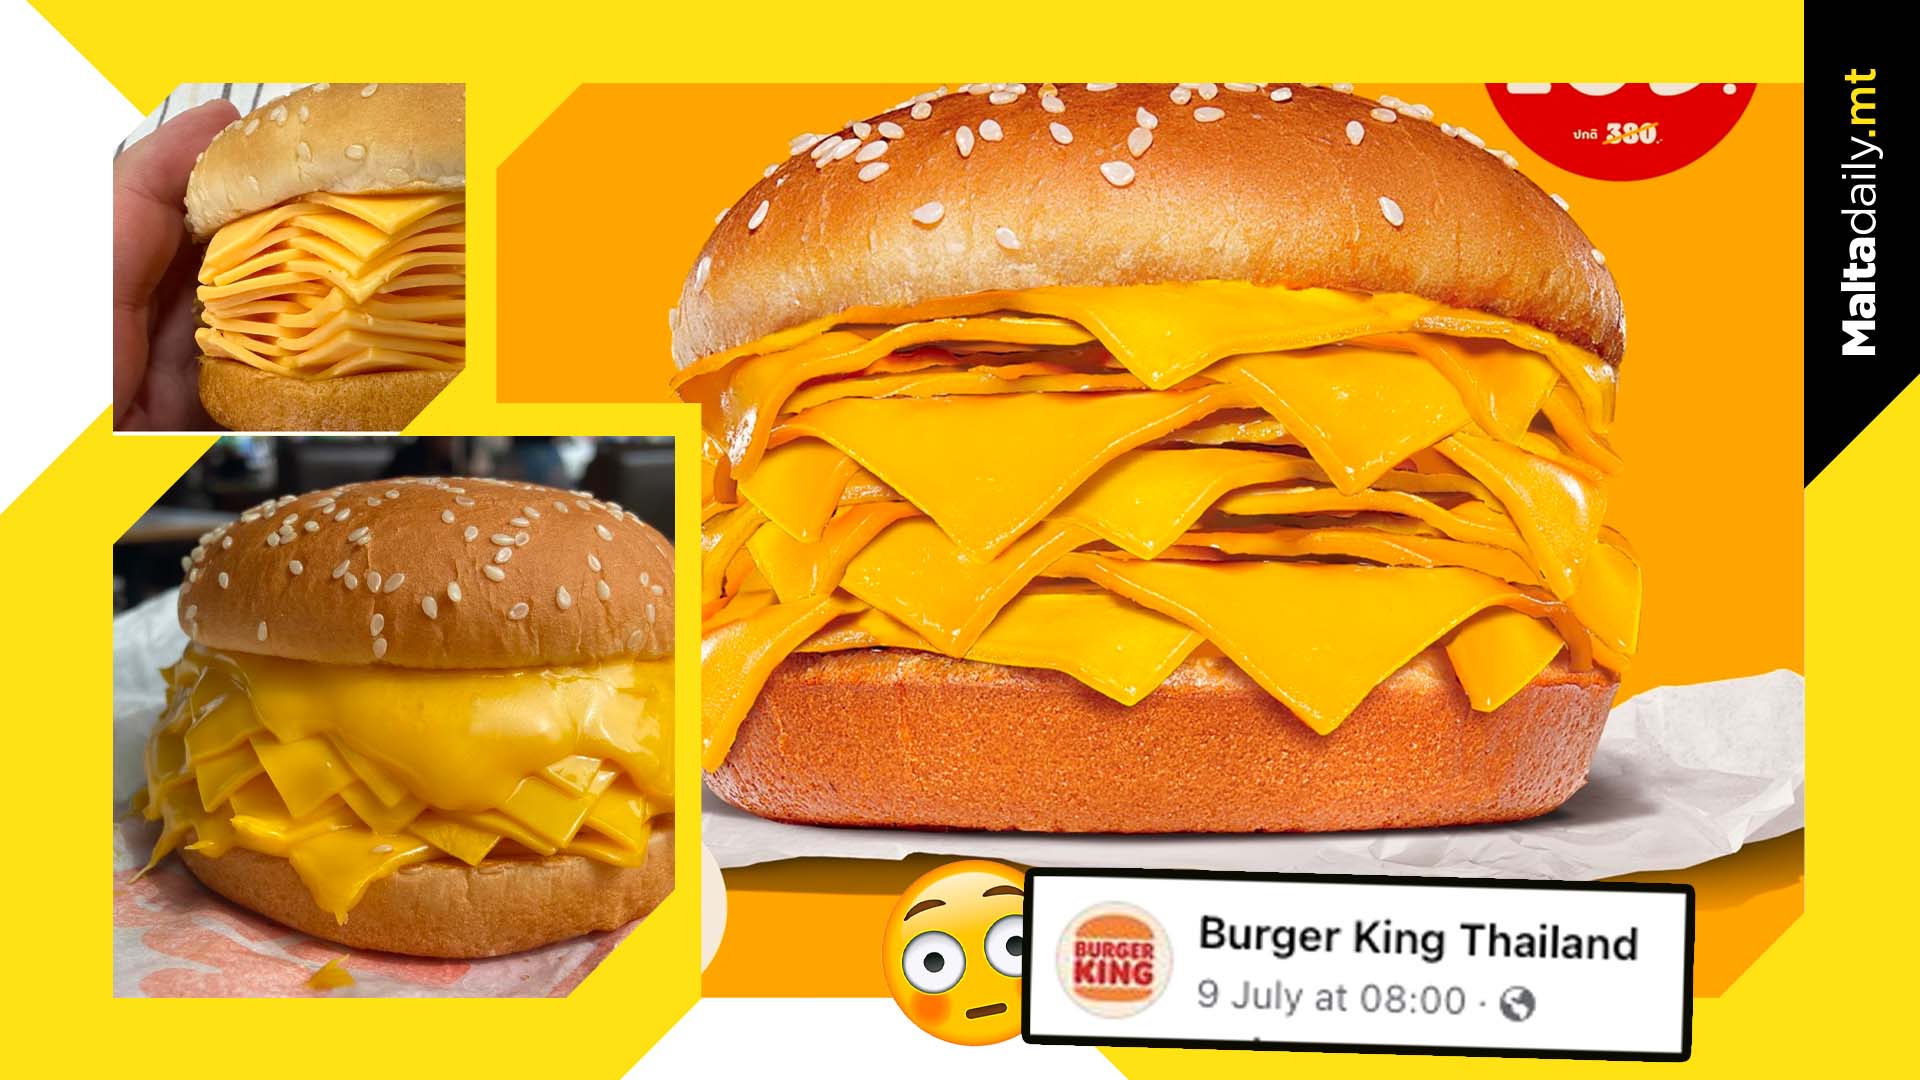 Burger King Thailand Release 20 Cheese Slice Burger